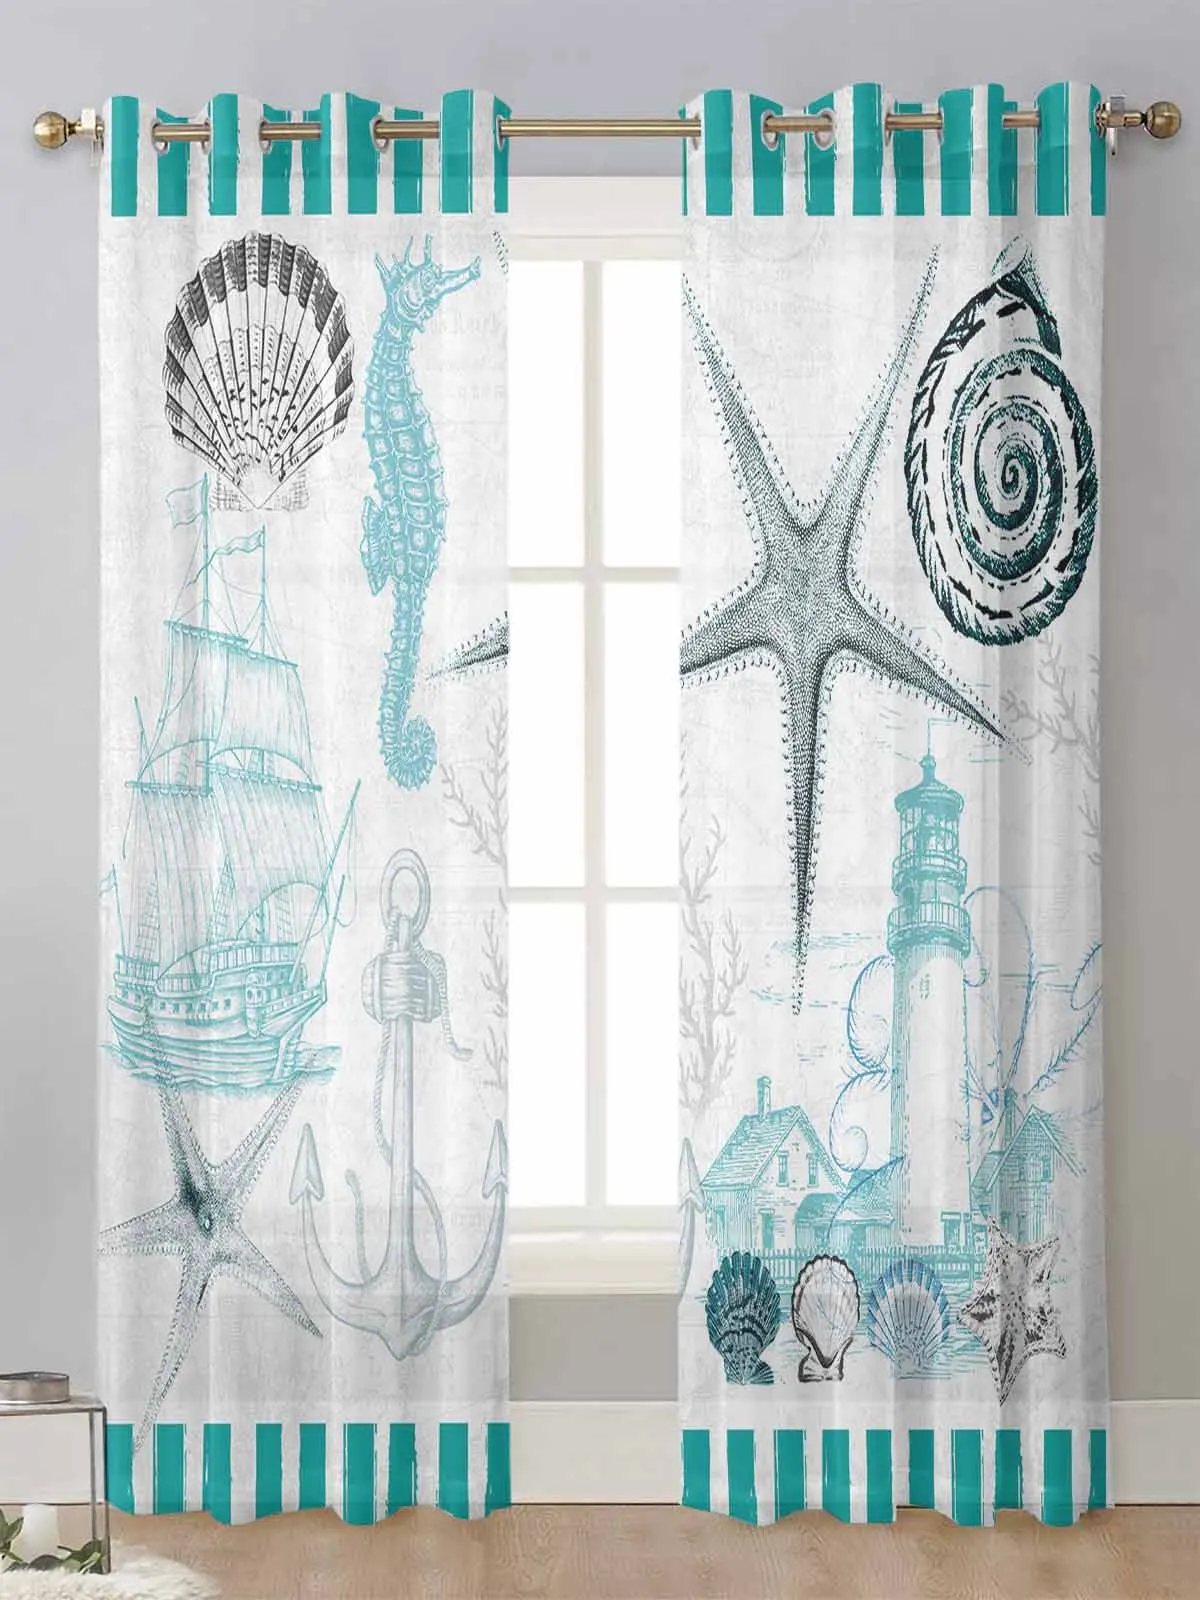 

Marine Texture Shells Starfish Lighthouse Anchor Sheer Curtains Living Room Window Voile Tulle Curtain Drapes Home Decor